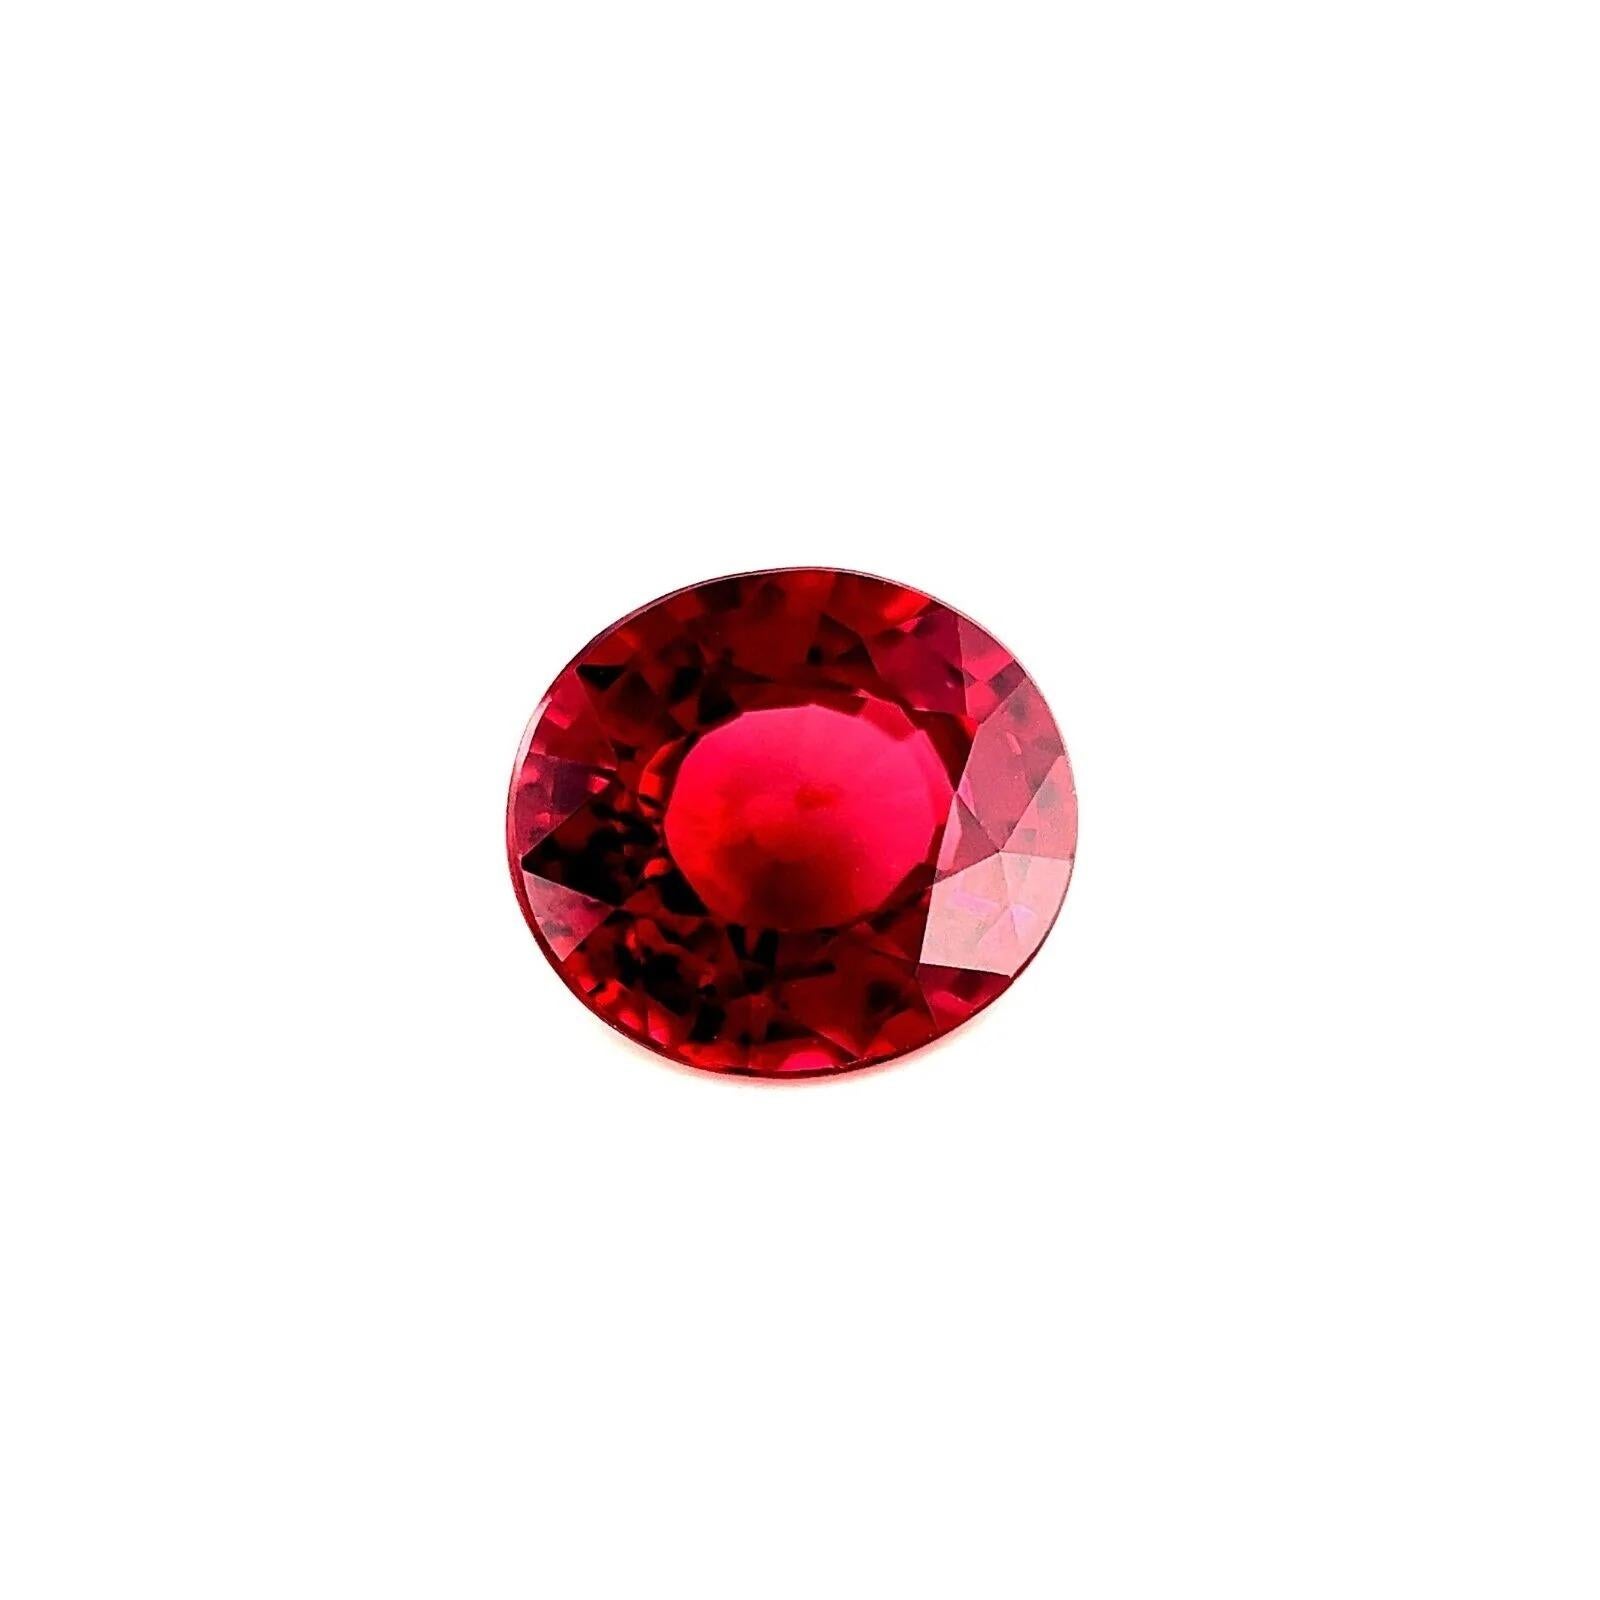 1.63ct Vivid Purplish Pink Rhodolite Garnet Oval Cut Loose VVS Gem 7.4x6.5mm

Fine Natural Rhodolite Garnet Gemstone. 
1.63 Carat with a beautiful vivid purple pink colour and excellent clarity. Has an excellent oval cut with good proportions and